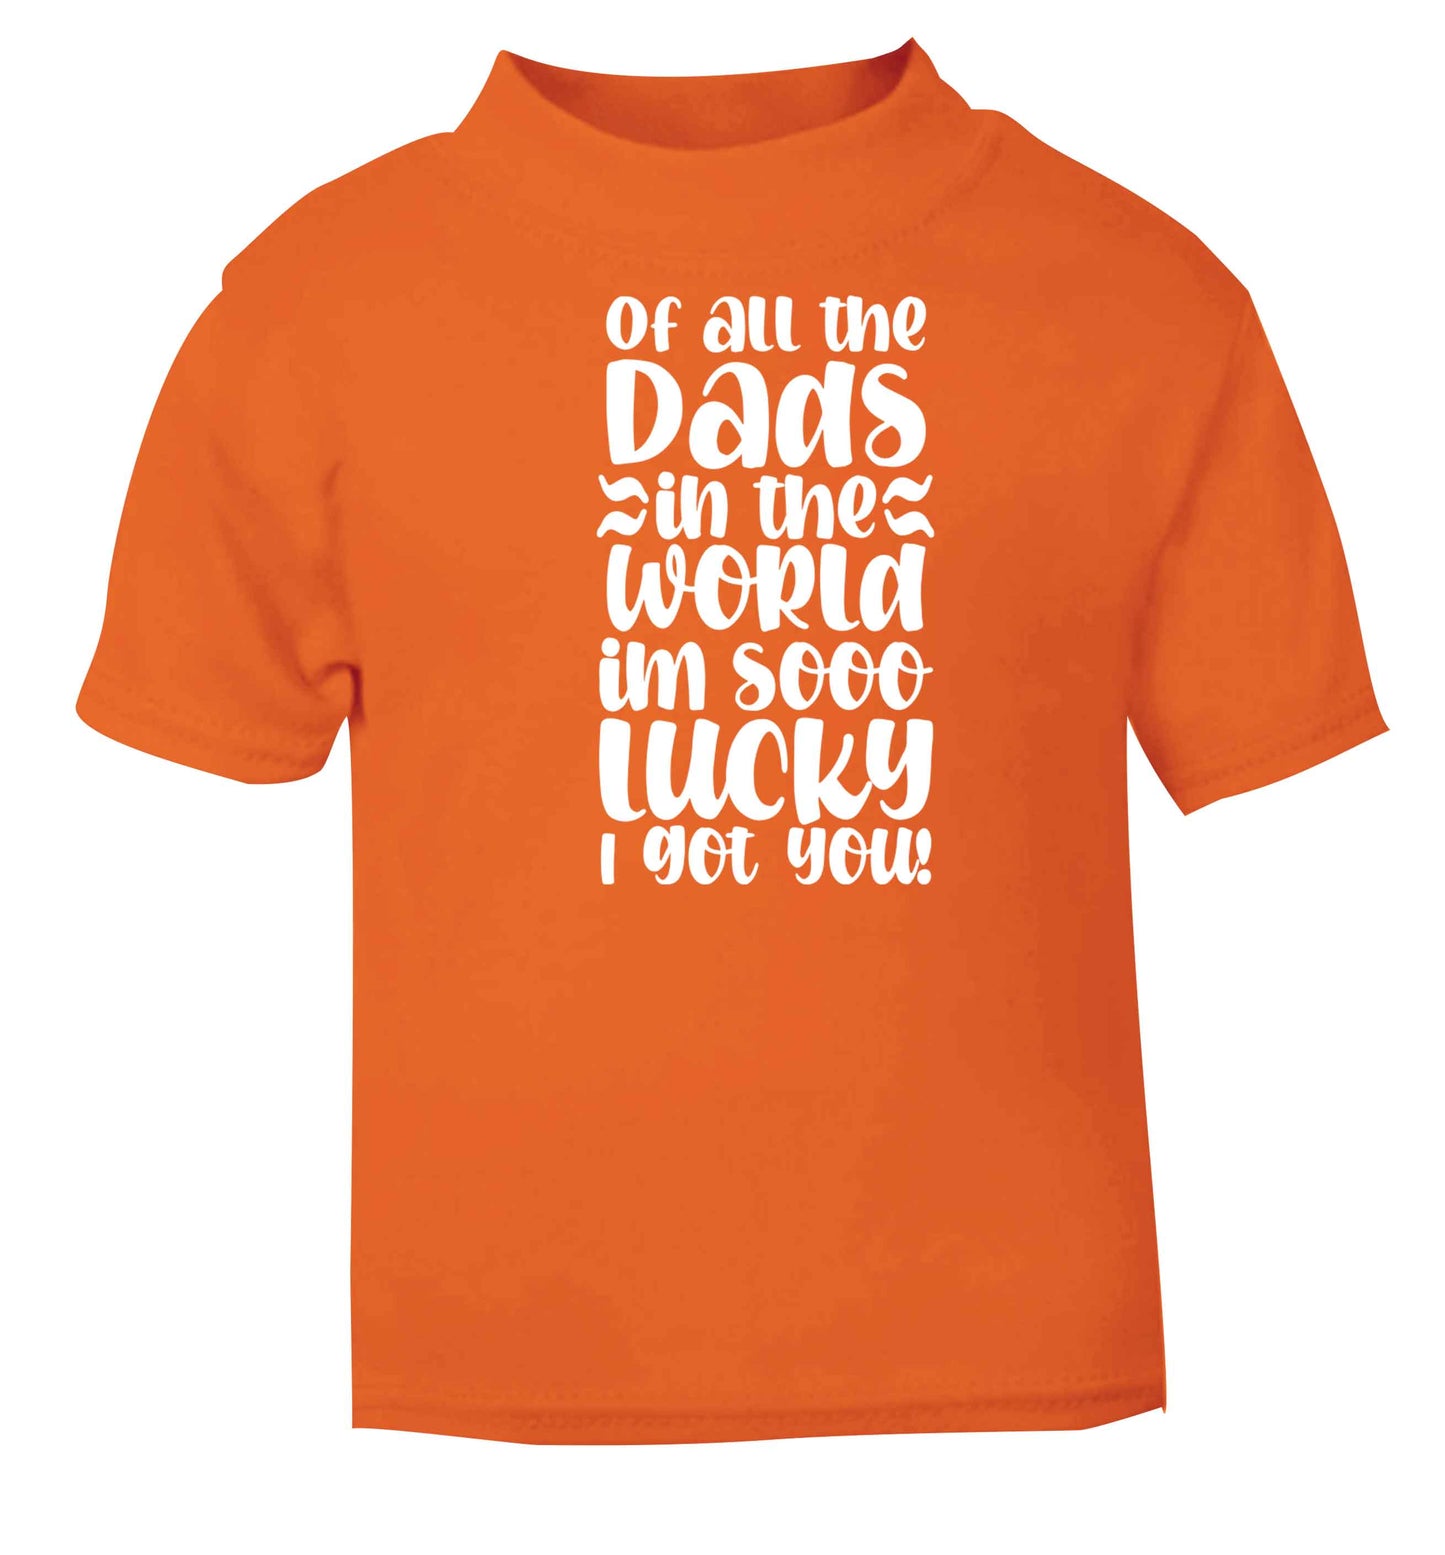 Of all the Dads in the world I'm so lucky I got you orange baby toddler Tshirt 2 Years